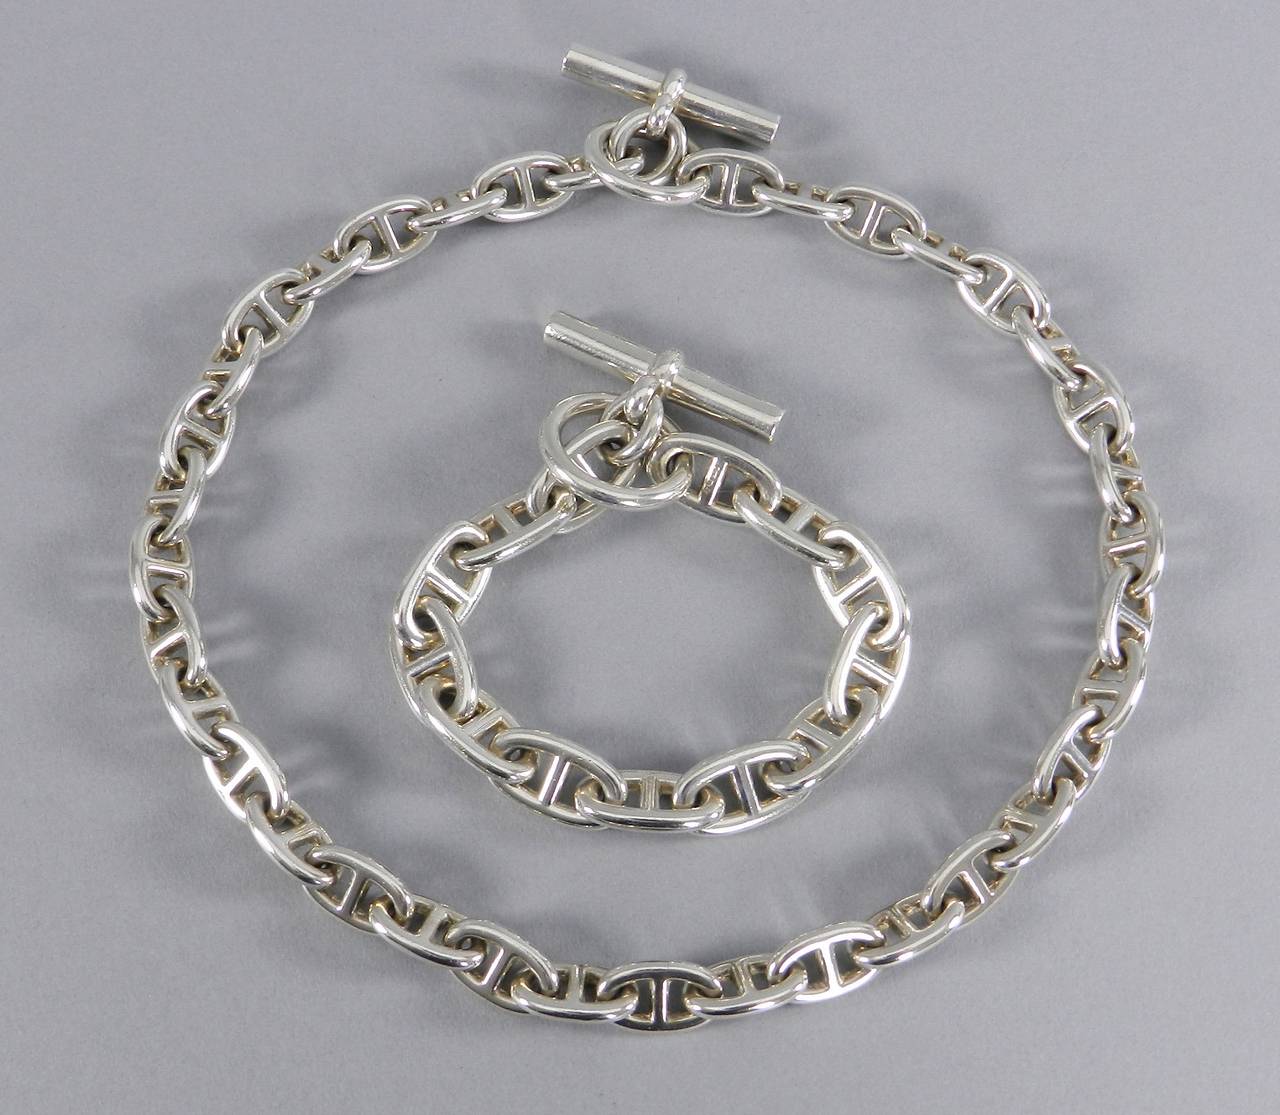 Hermes Chaine d'Ancre sterling silver necklace and bracelet. Necklace is the MM size with 36 links and measures 43.5 cm. The bracelet is the GM size with 12 links and measures 7